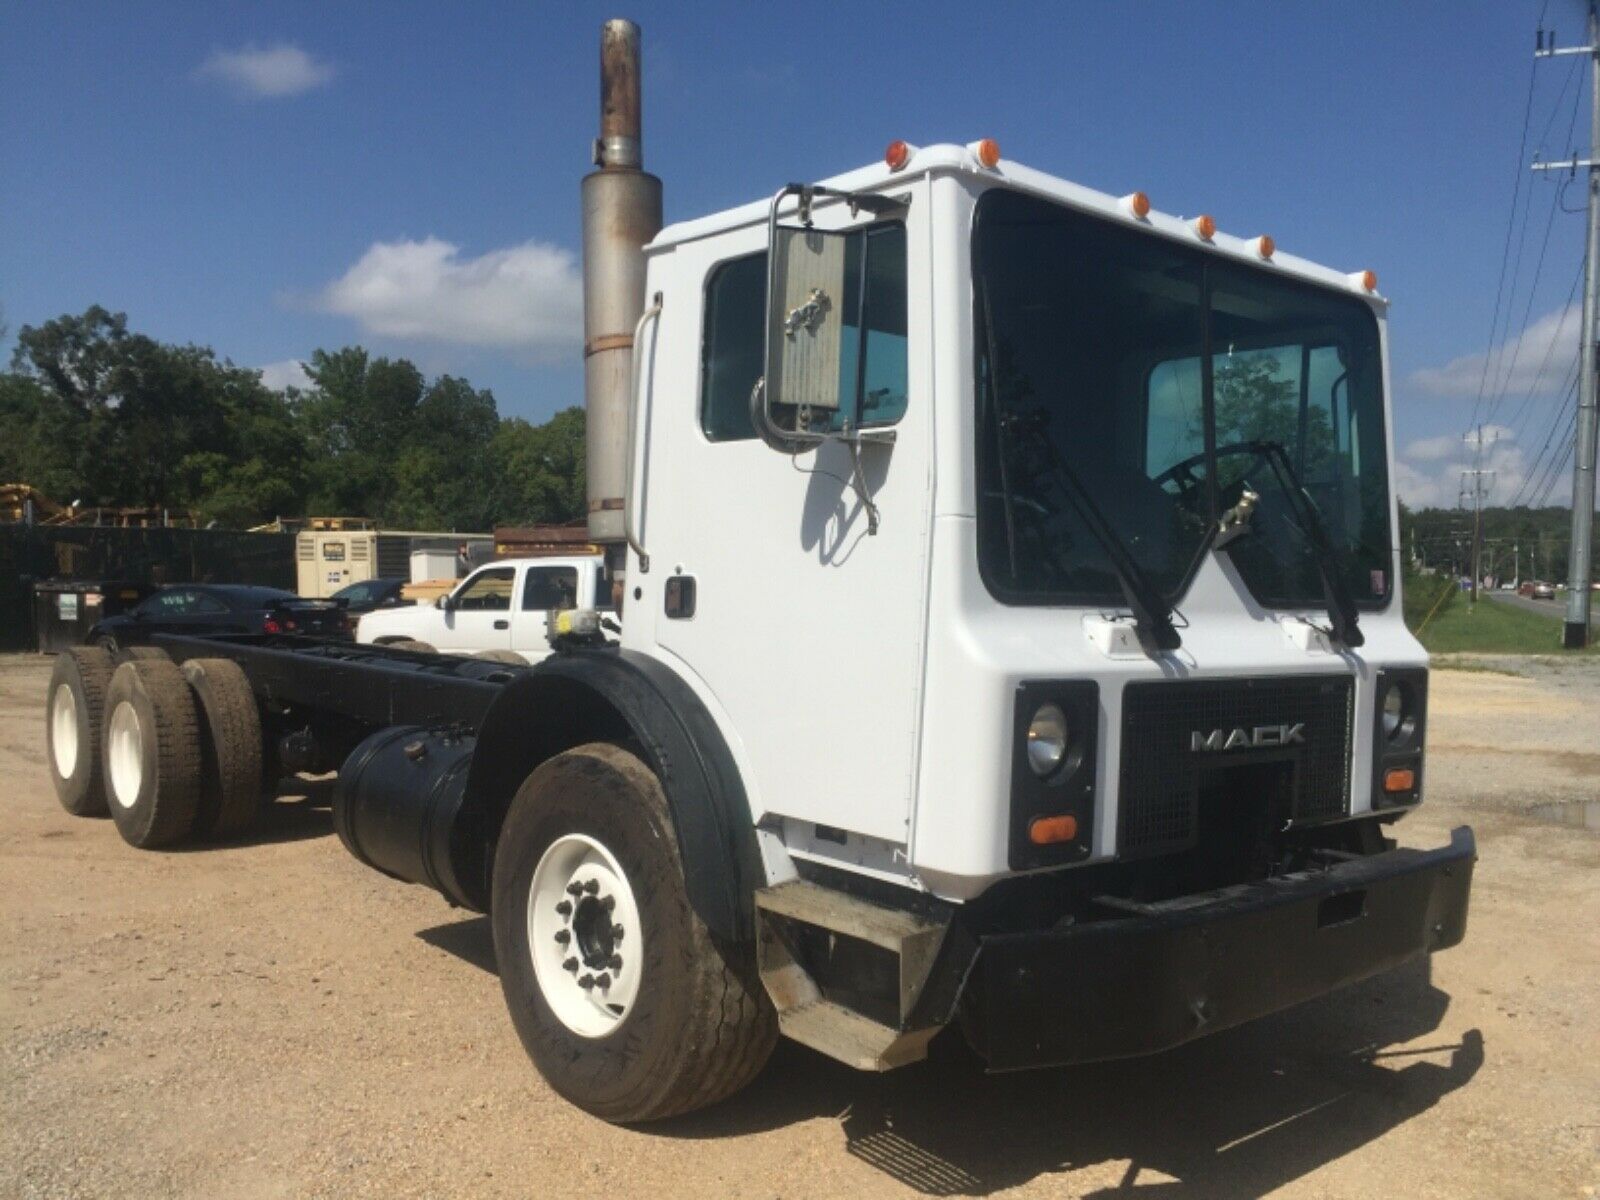 2007 Mack Mr688s Cab And Chassis, Heavy Spec, Very Clean, Ready To Work!!!